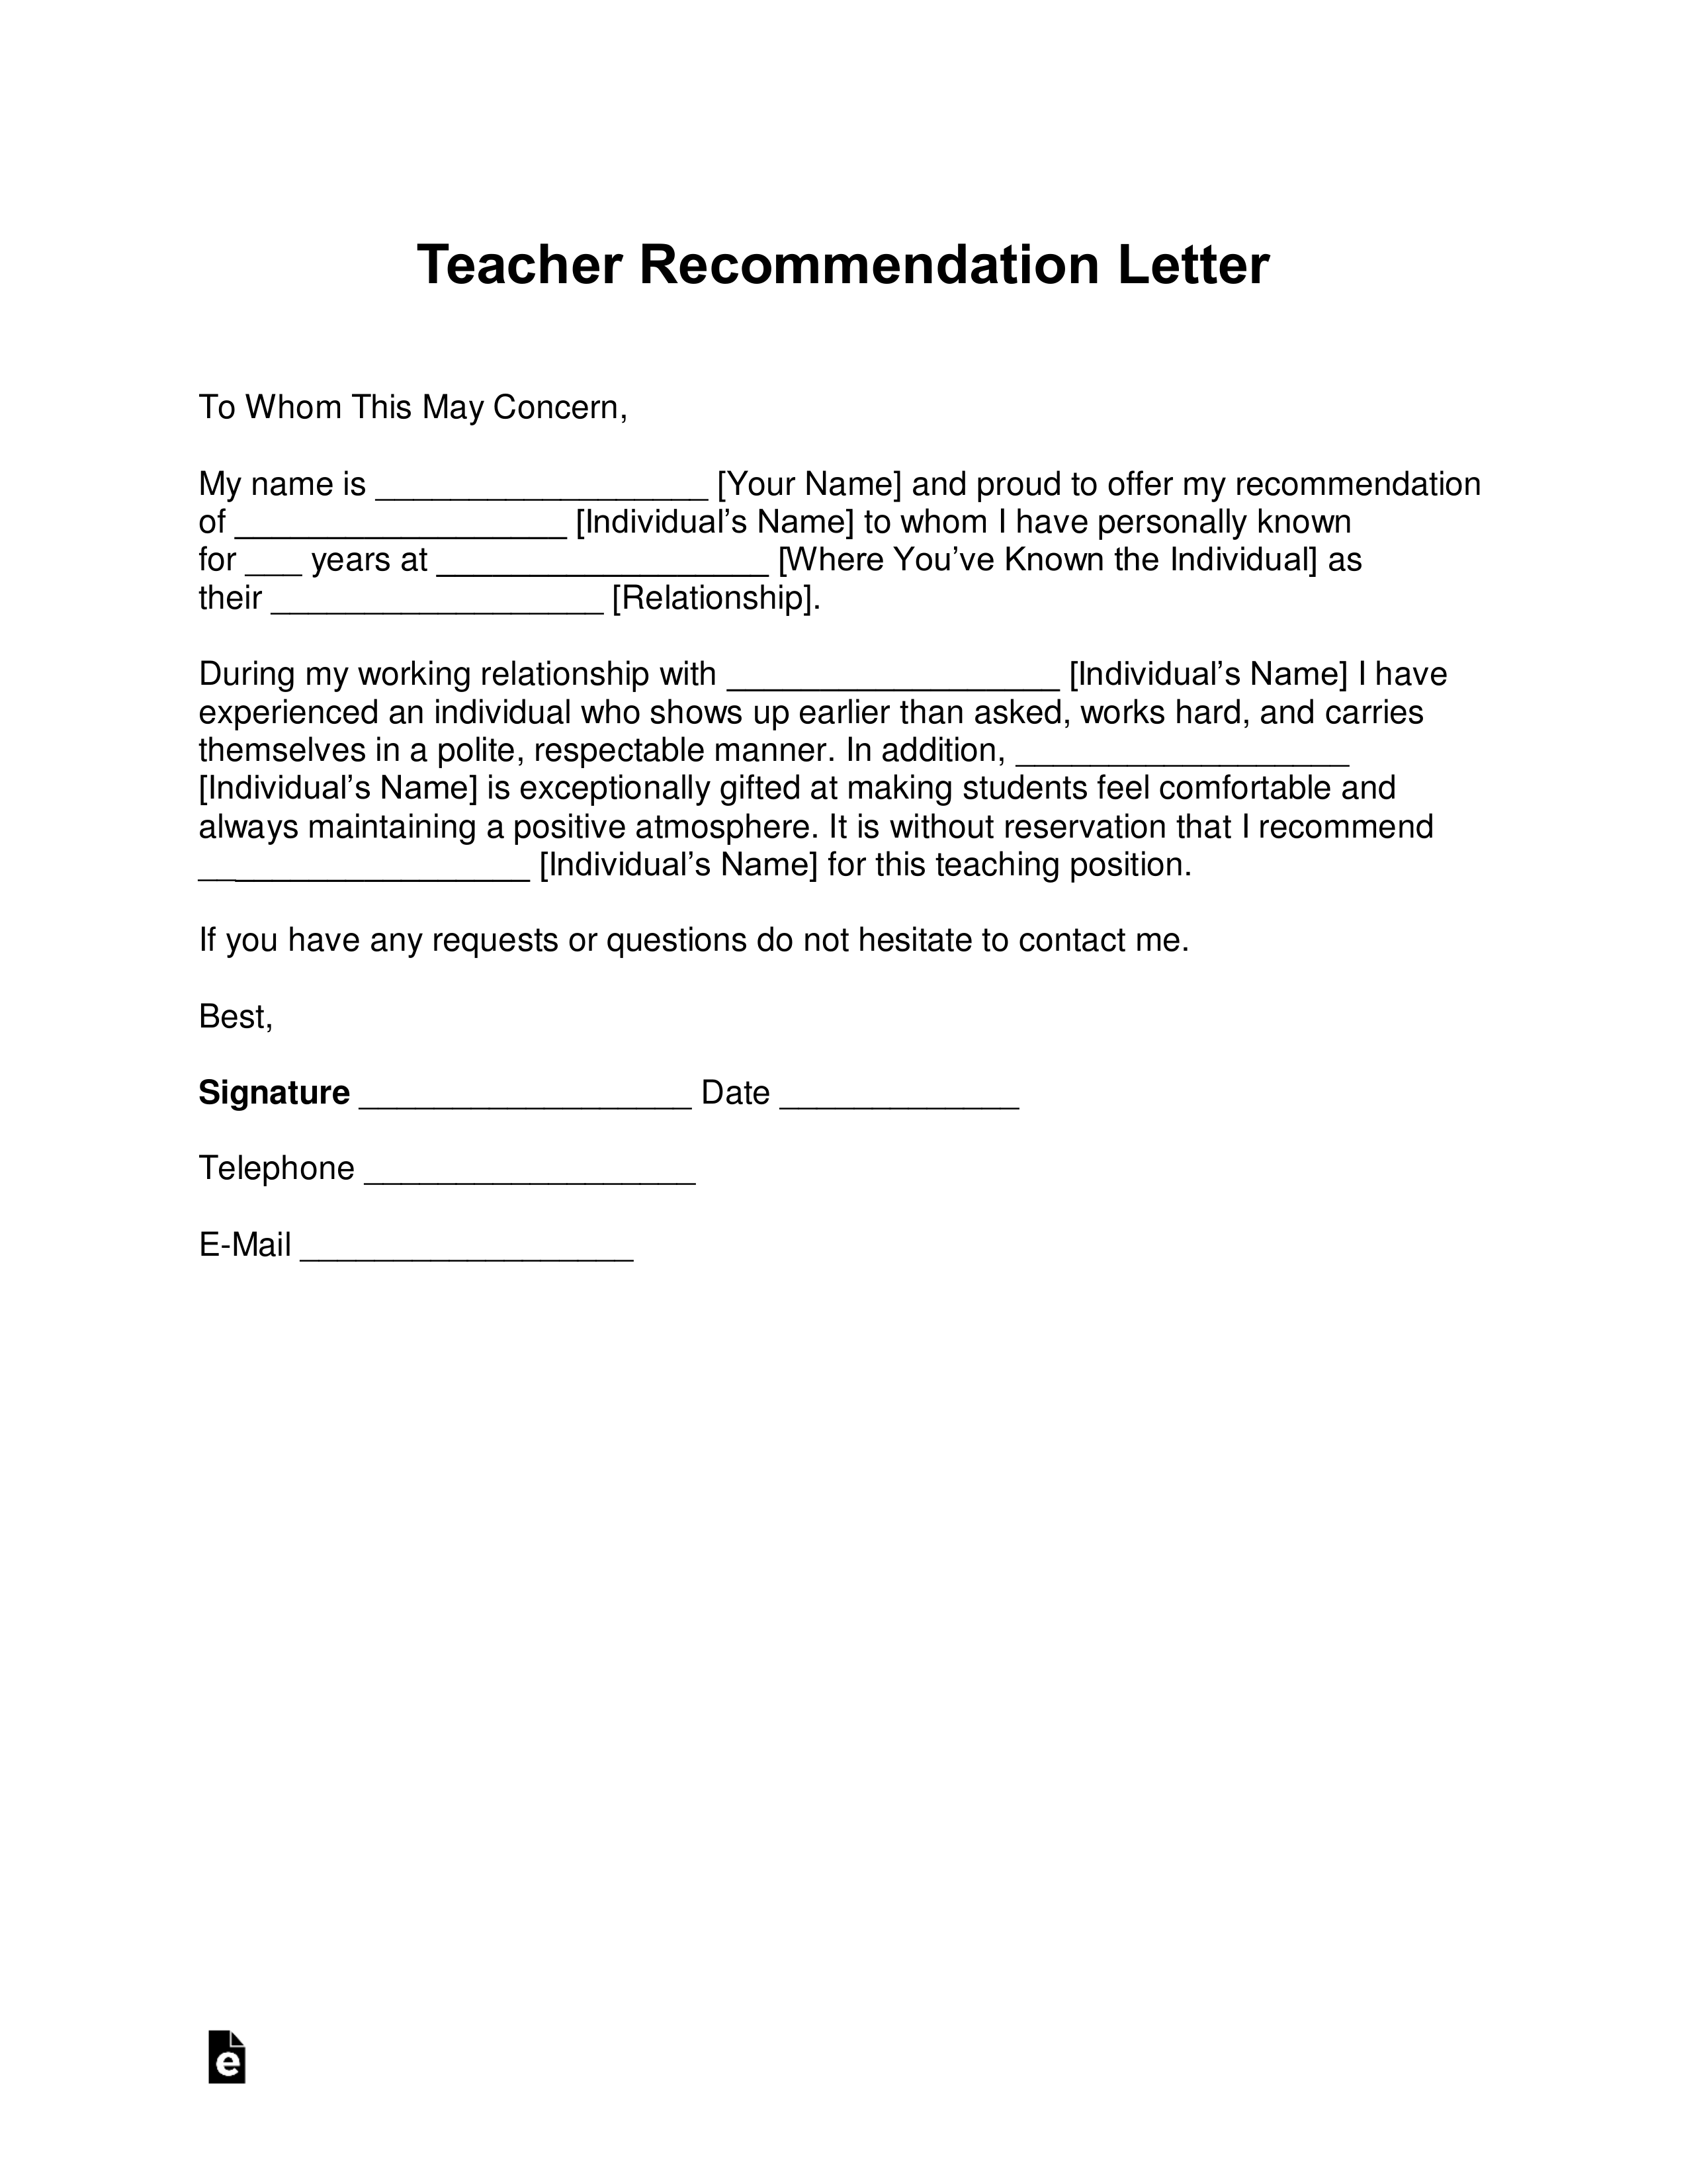 Letter Of Recommendation For A Teacher Colleague from eforms.com